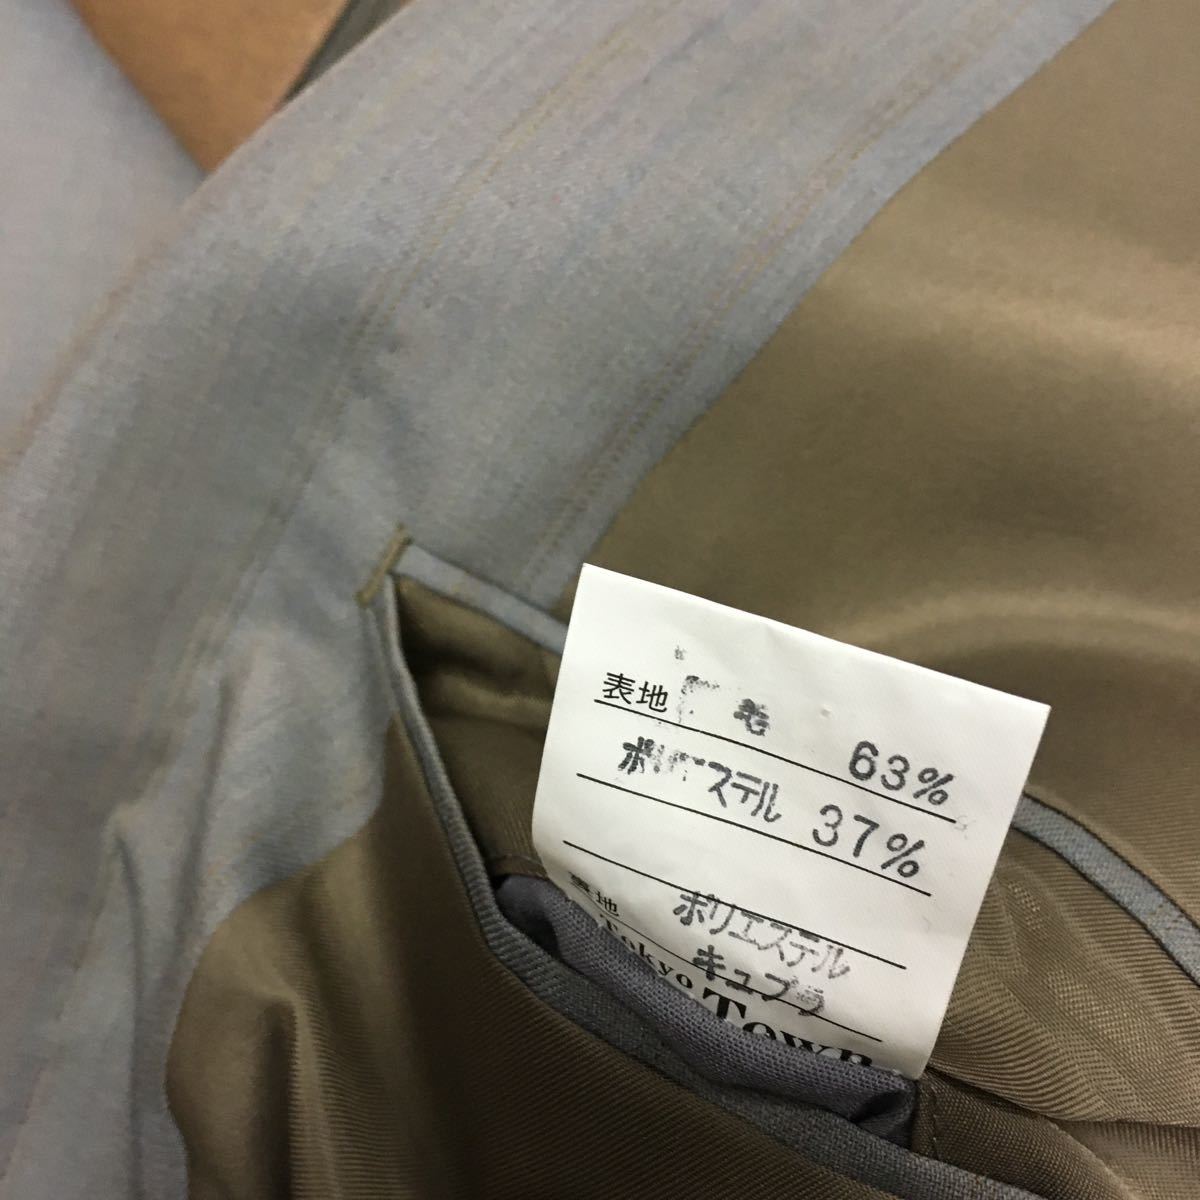  new goods unused super-discount Tokyo meido double-breasted suit setup size AB6 beige gray. alternator -to stripe made in Japan . rice field ..